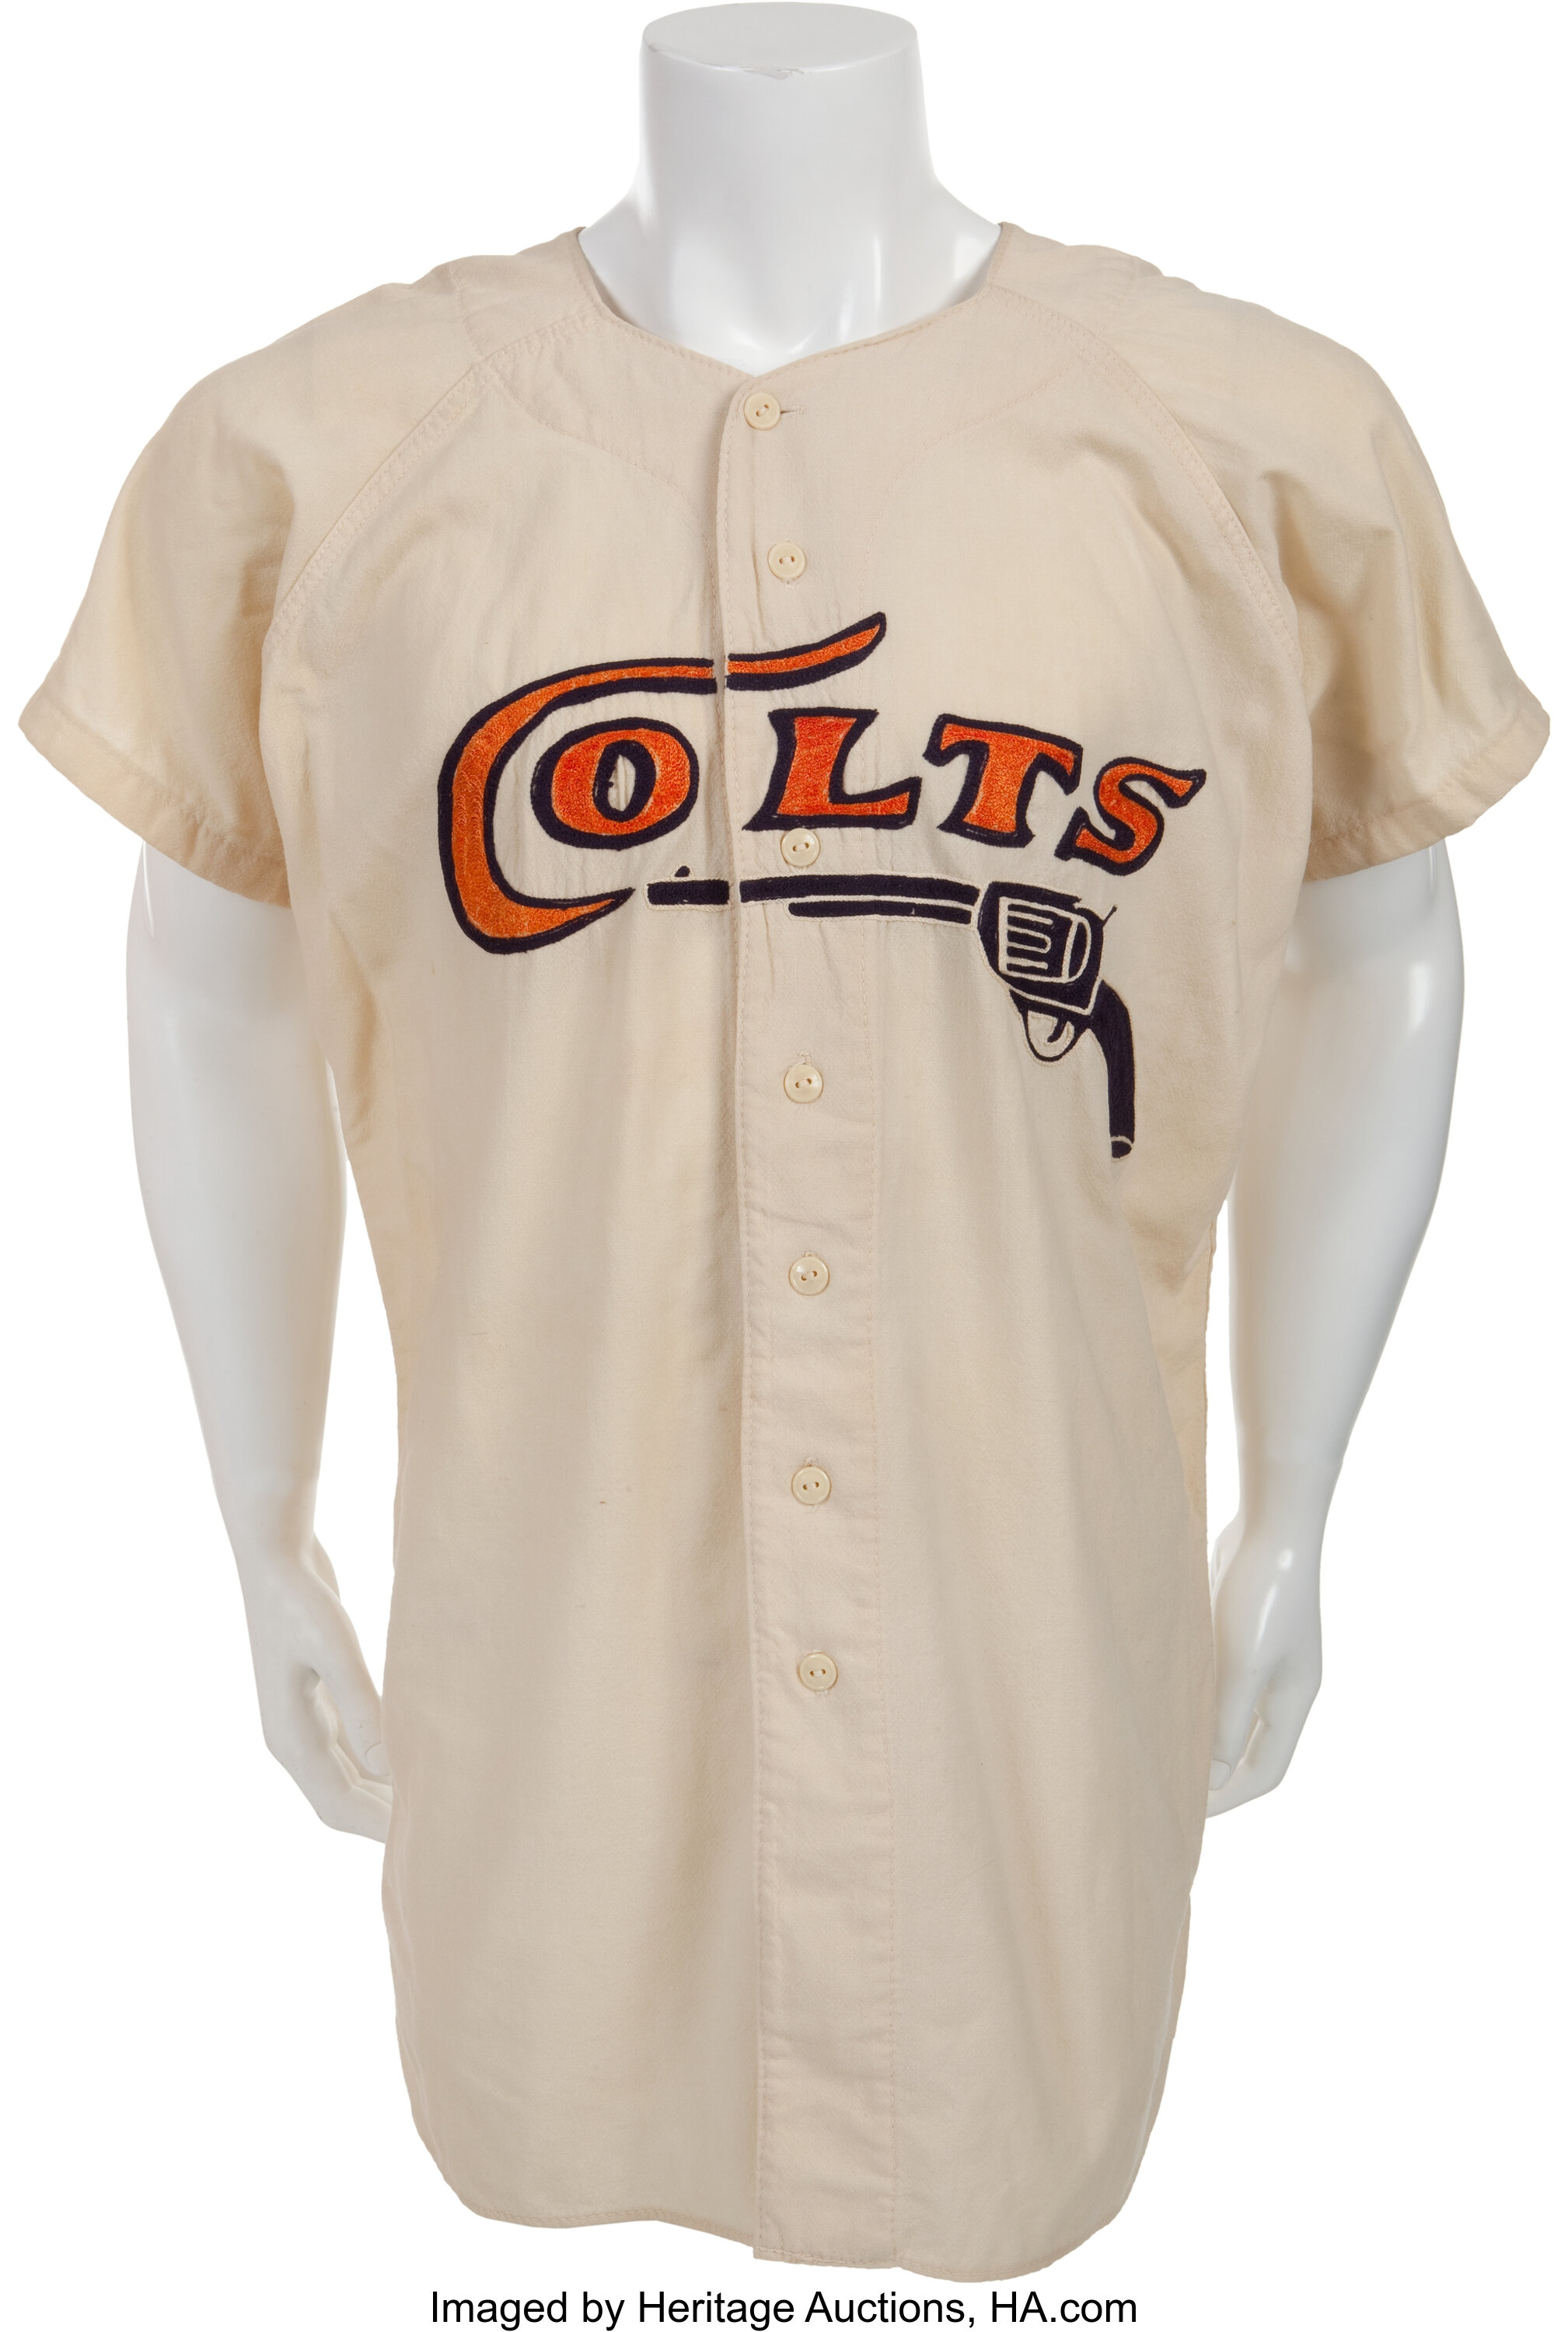 Sold at Auction: Rare 1962 Aaron Pointer Houston Colt 45s professional  model home jersey (Last Professional .400 Hitter)(SGC/Grob: Excellent).